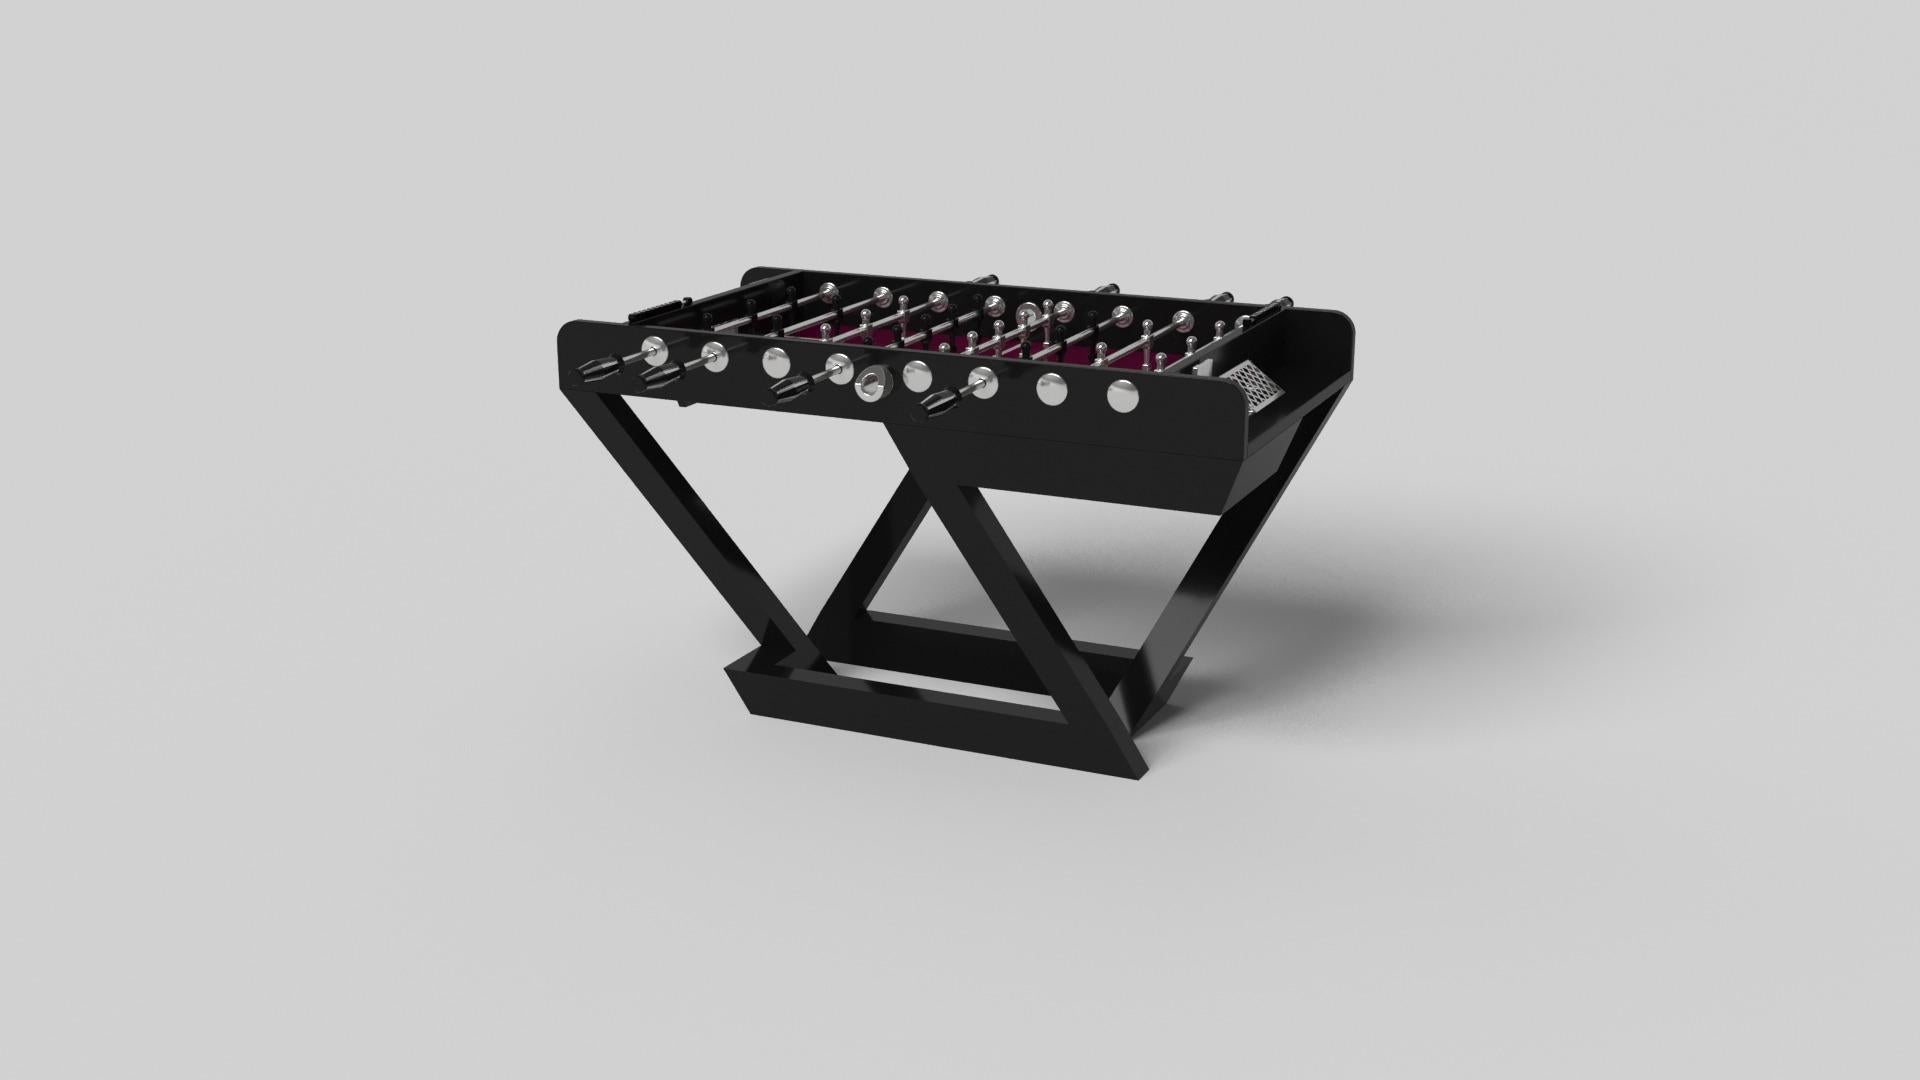 A contemporary composition of clean lines and sleek edges, the Trinity foosball table in black chrome with red accent is an elegant expression of modern design. Handcrafted from durable metal with vibrant red accents and a regulation top for